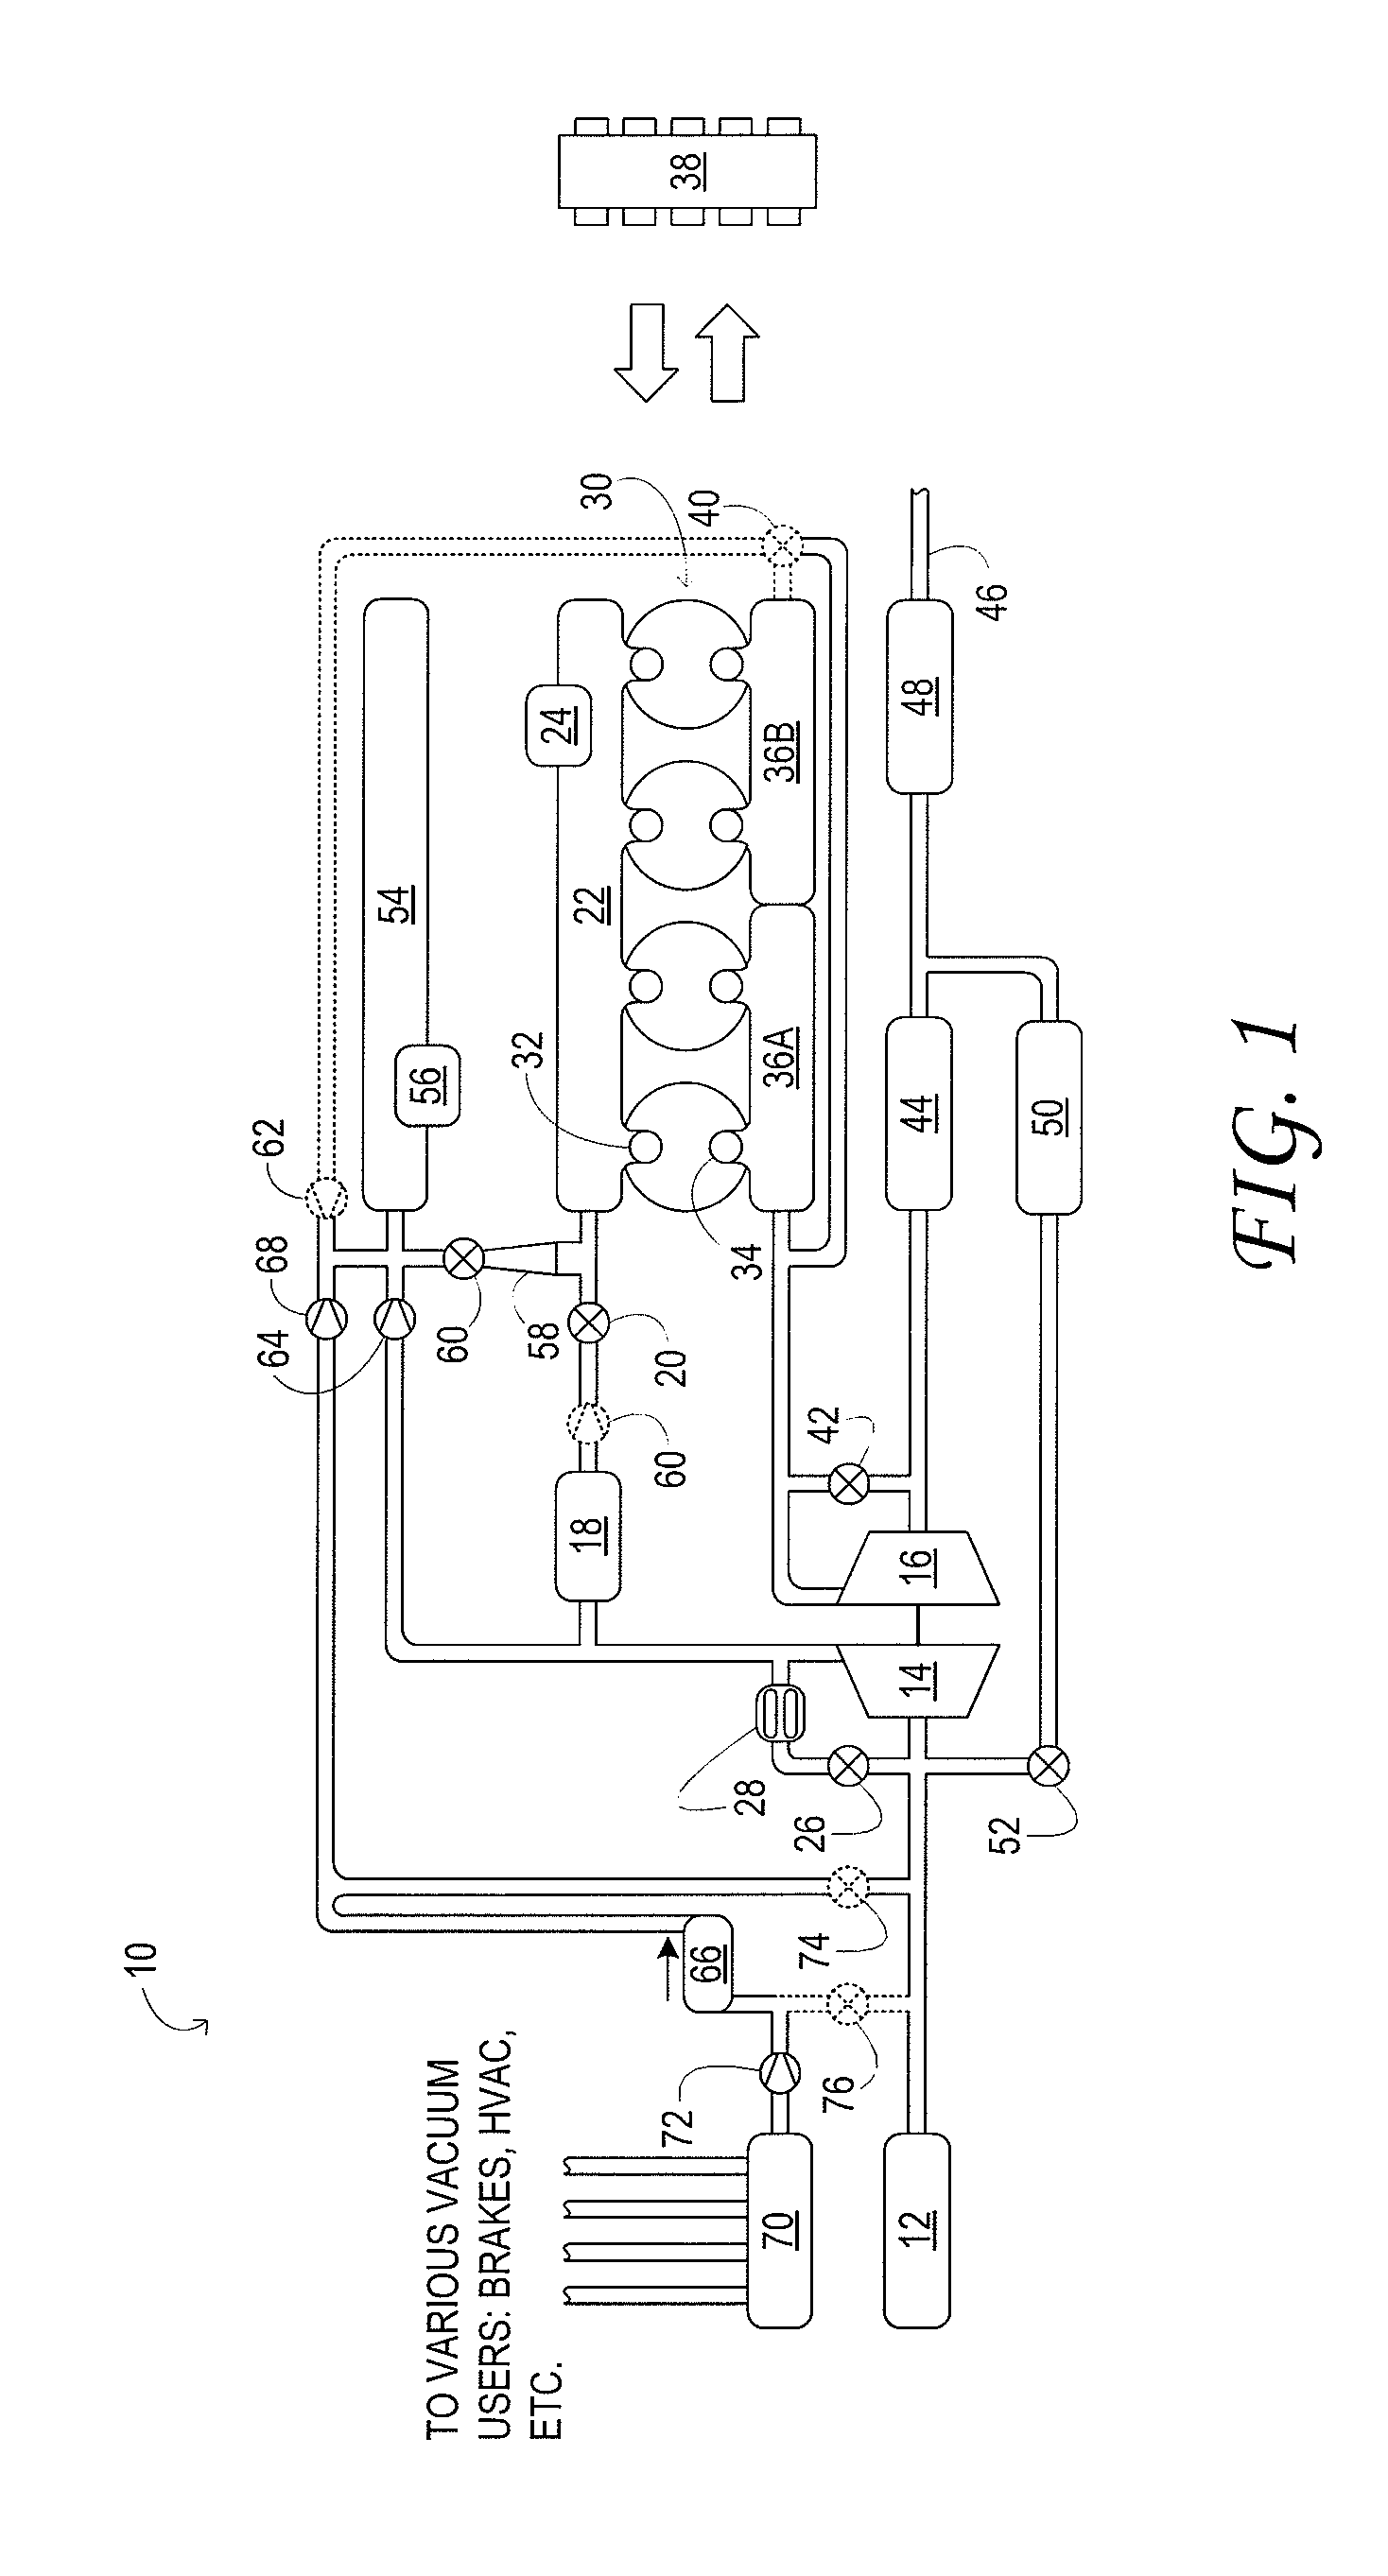 Stored compressed air management and flow control for improved engine performance